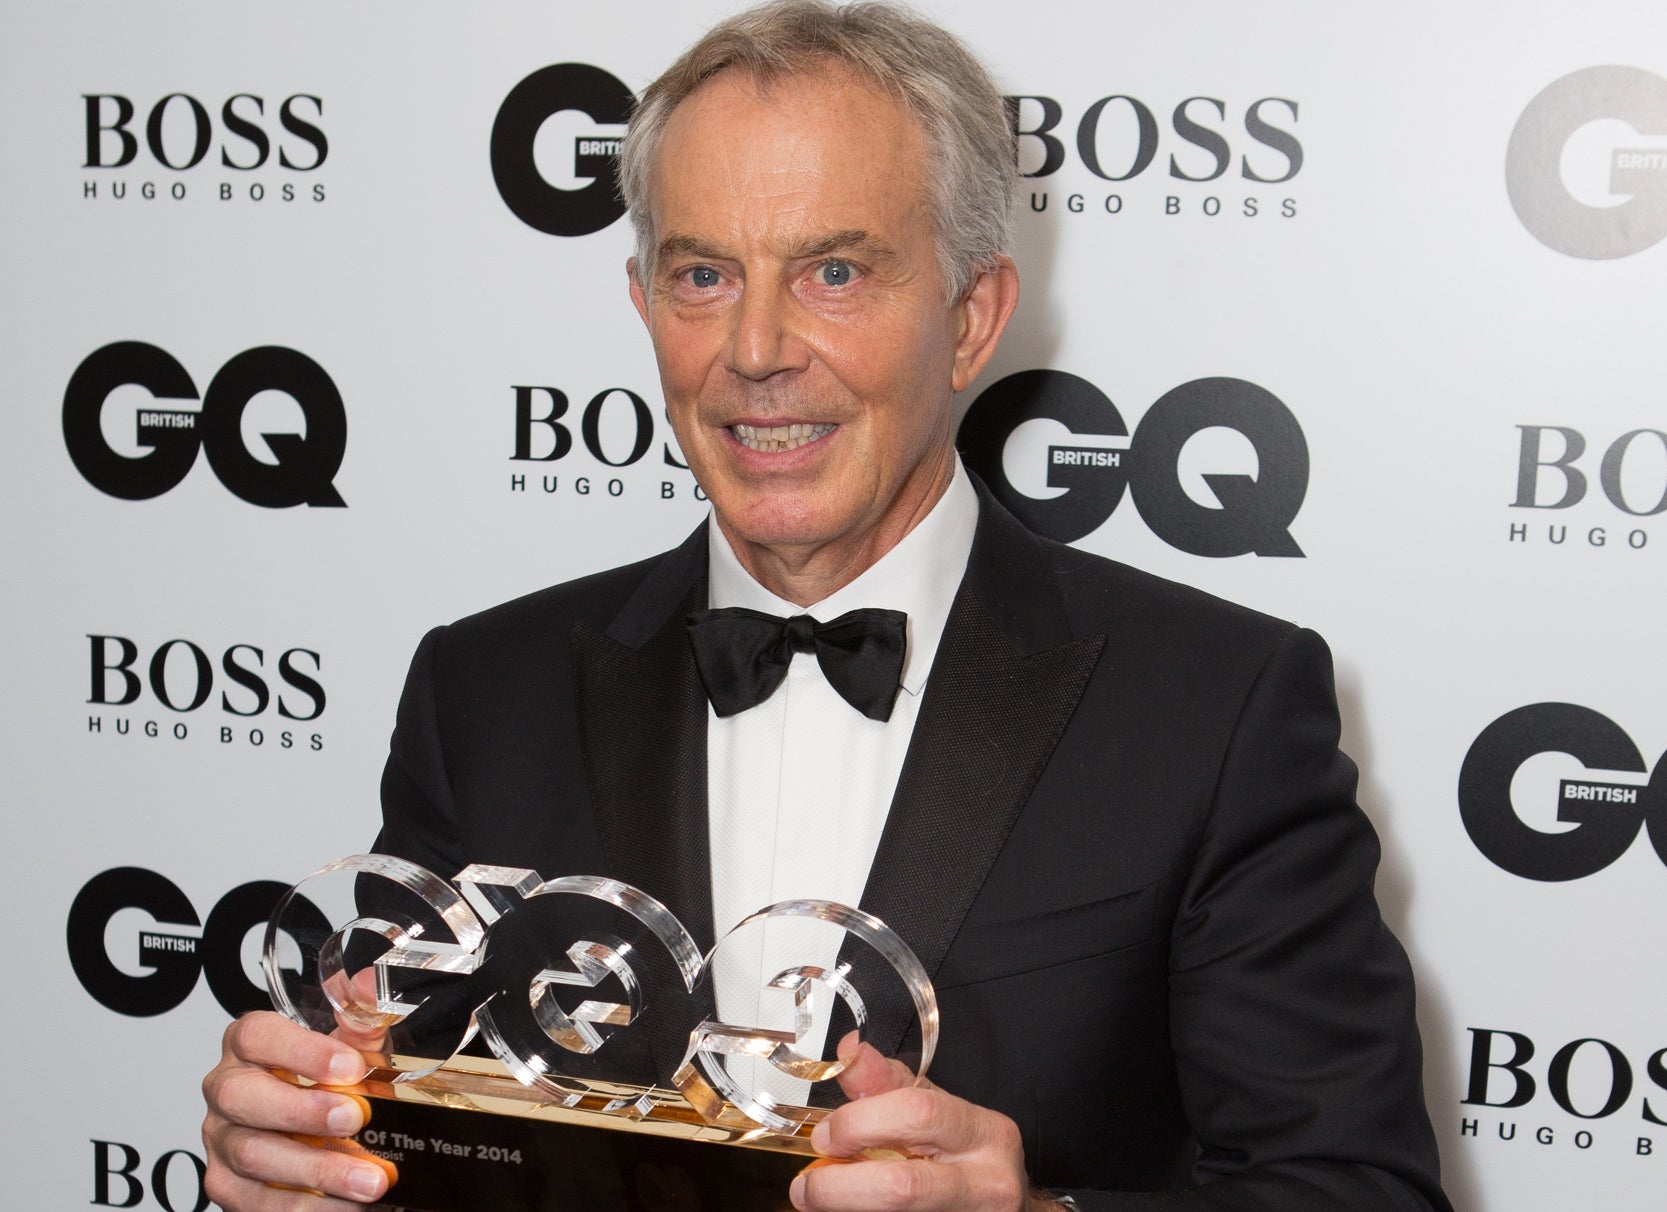 Tony Blair has received a GQ award for 'Philanthropist of the Year'